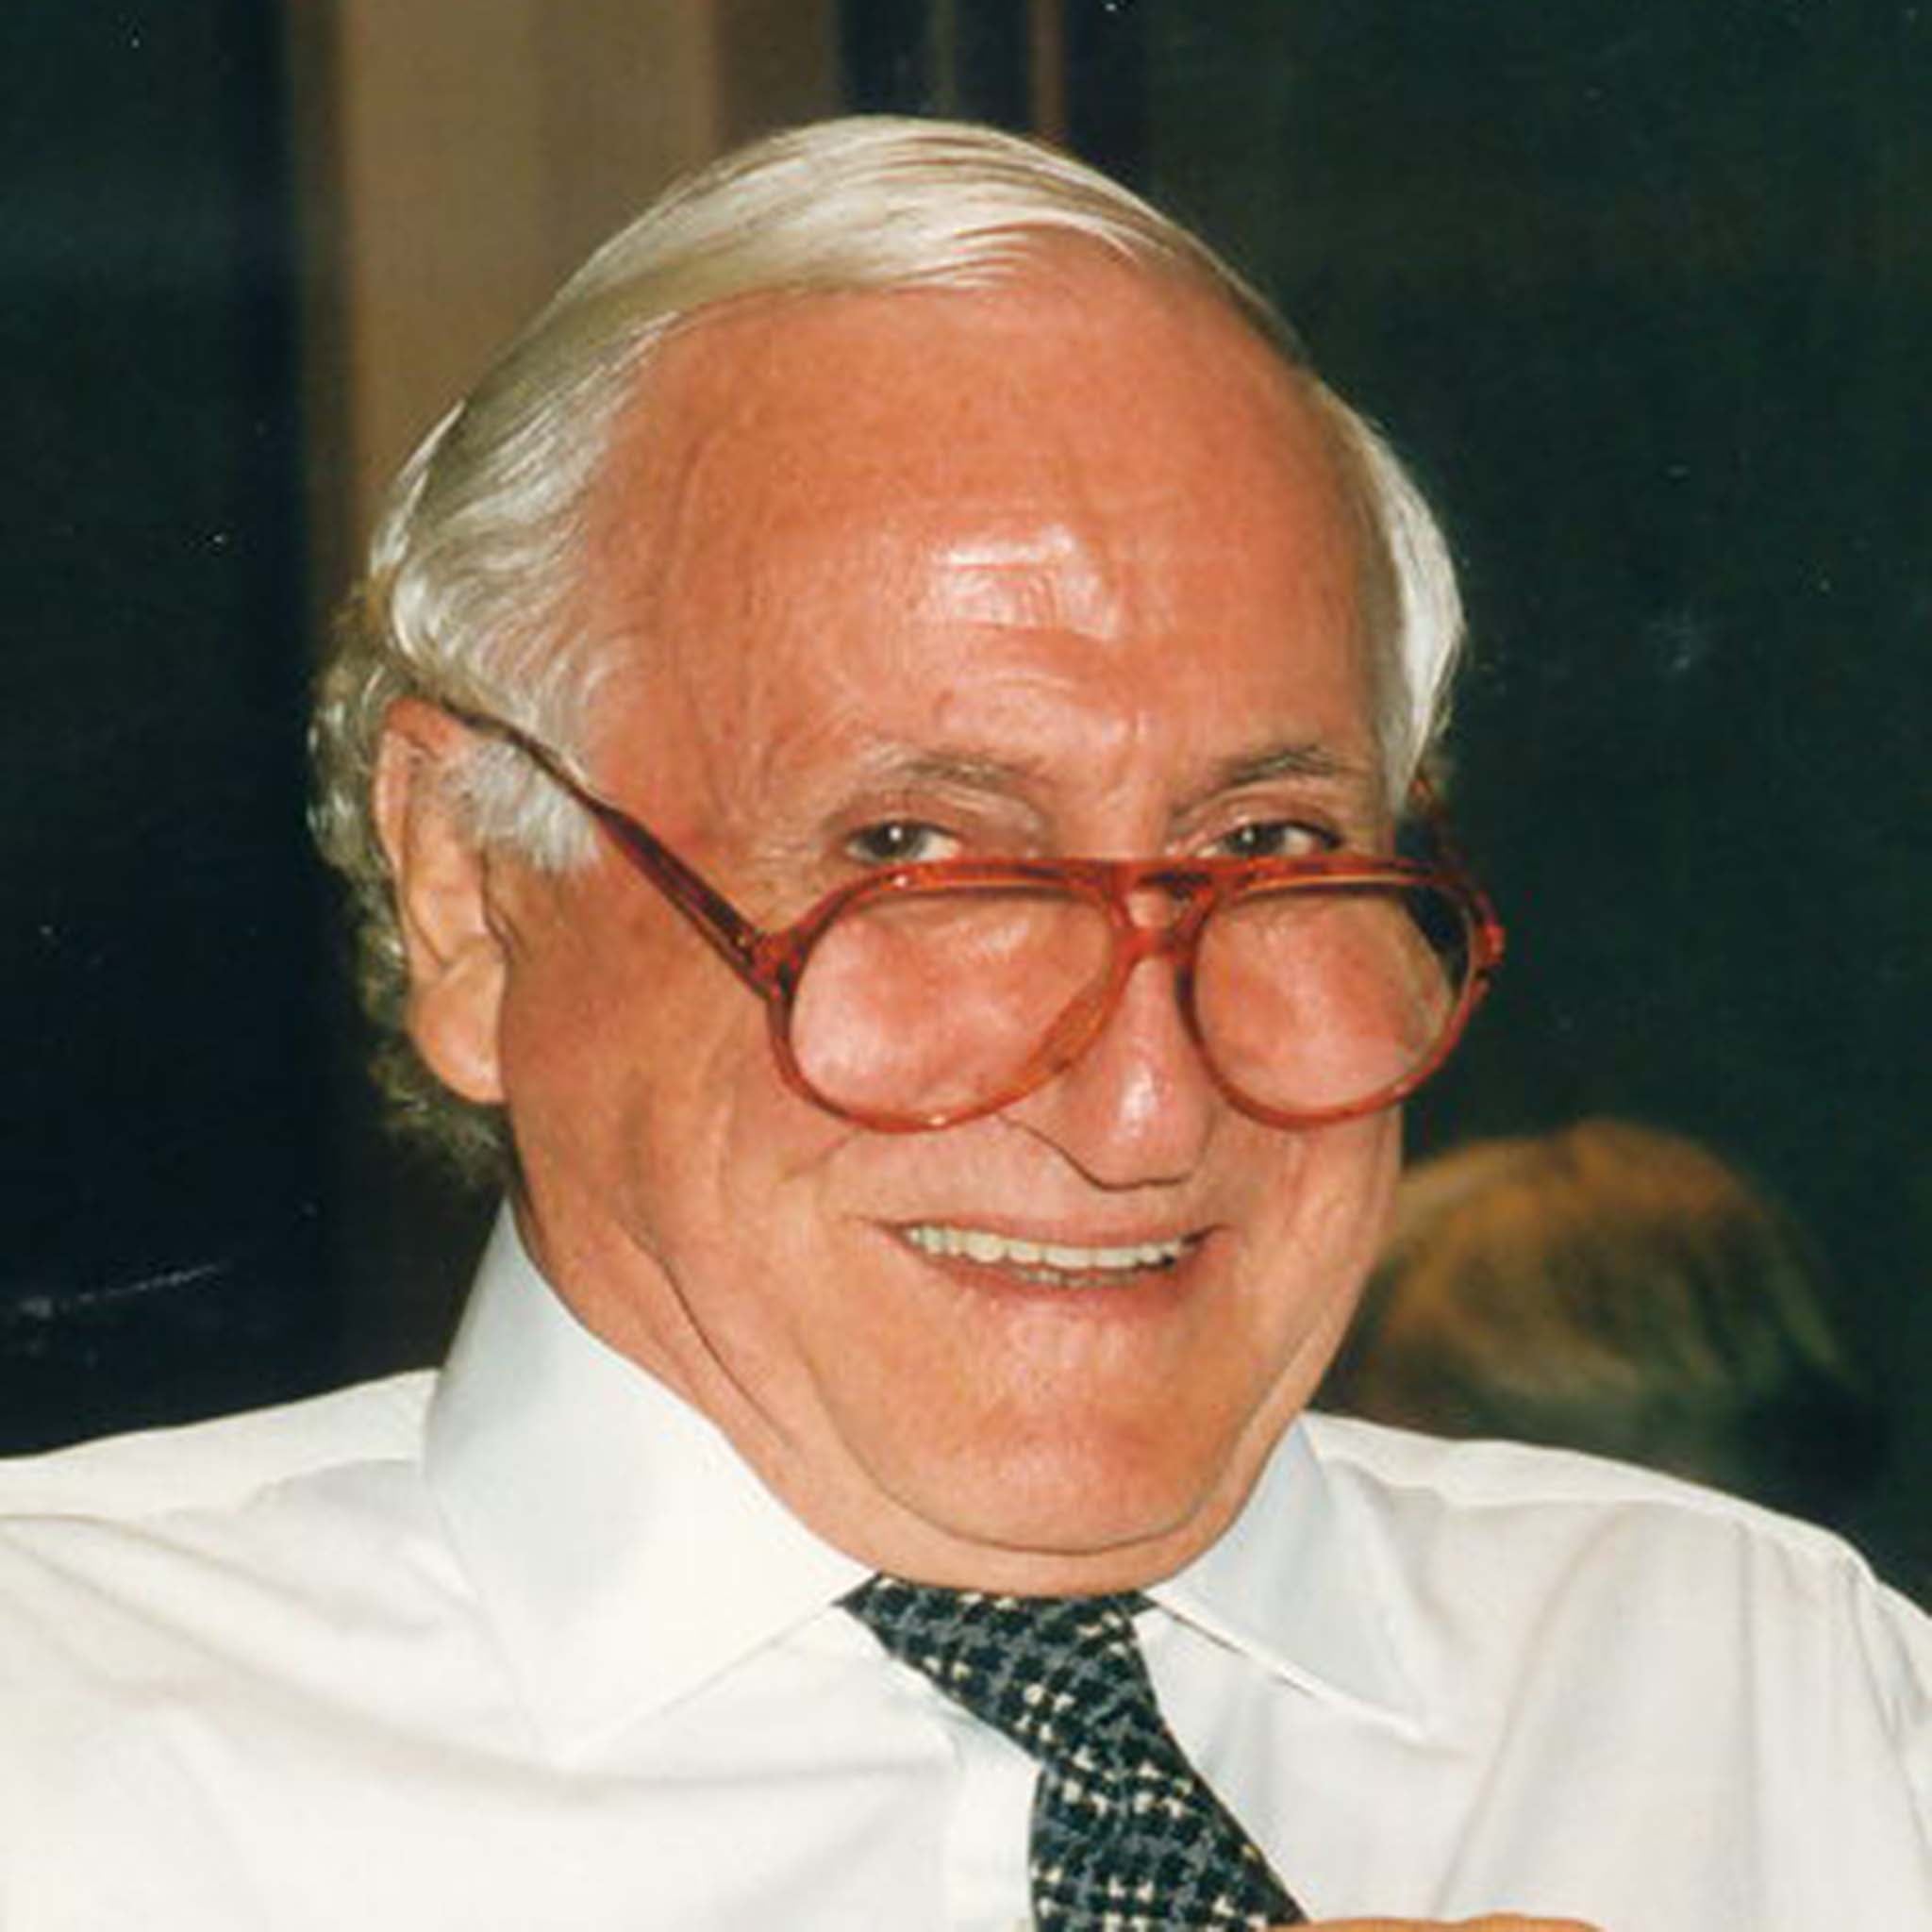 Tony Priday, who has died in Marbella aged 92, was bridge correspondent of The Sunday Telegraph for 36 years, from the newspaper's launch in 1961 until 1997.